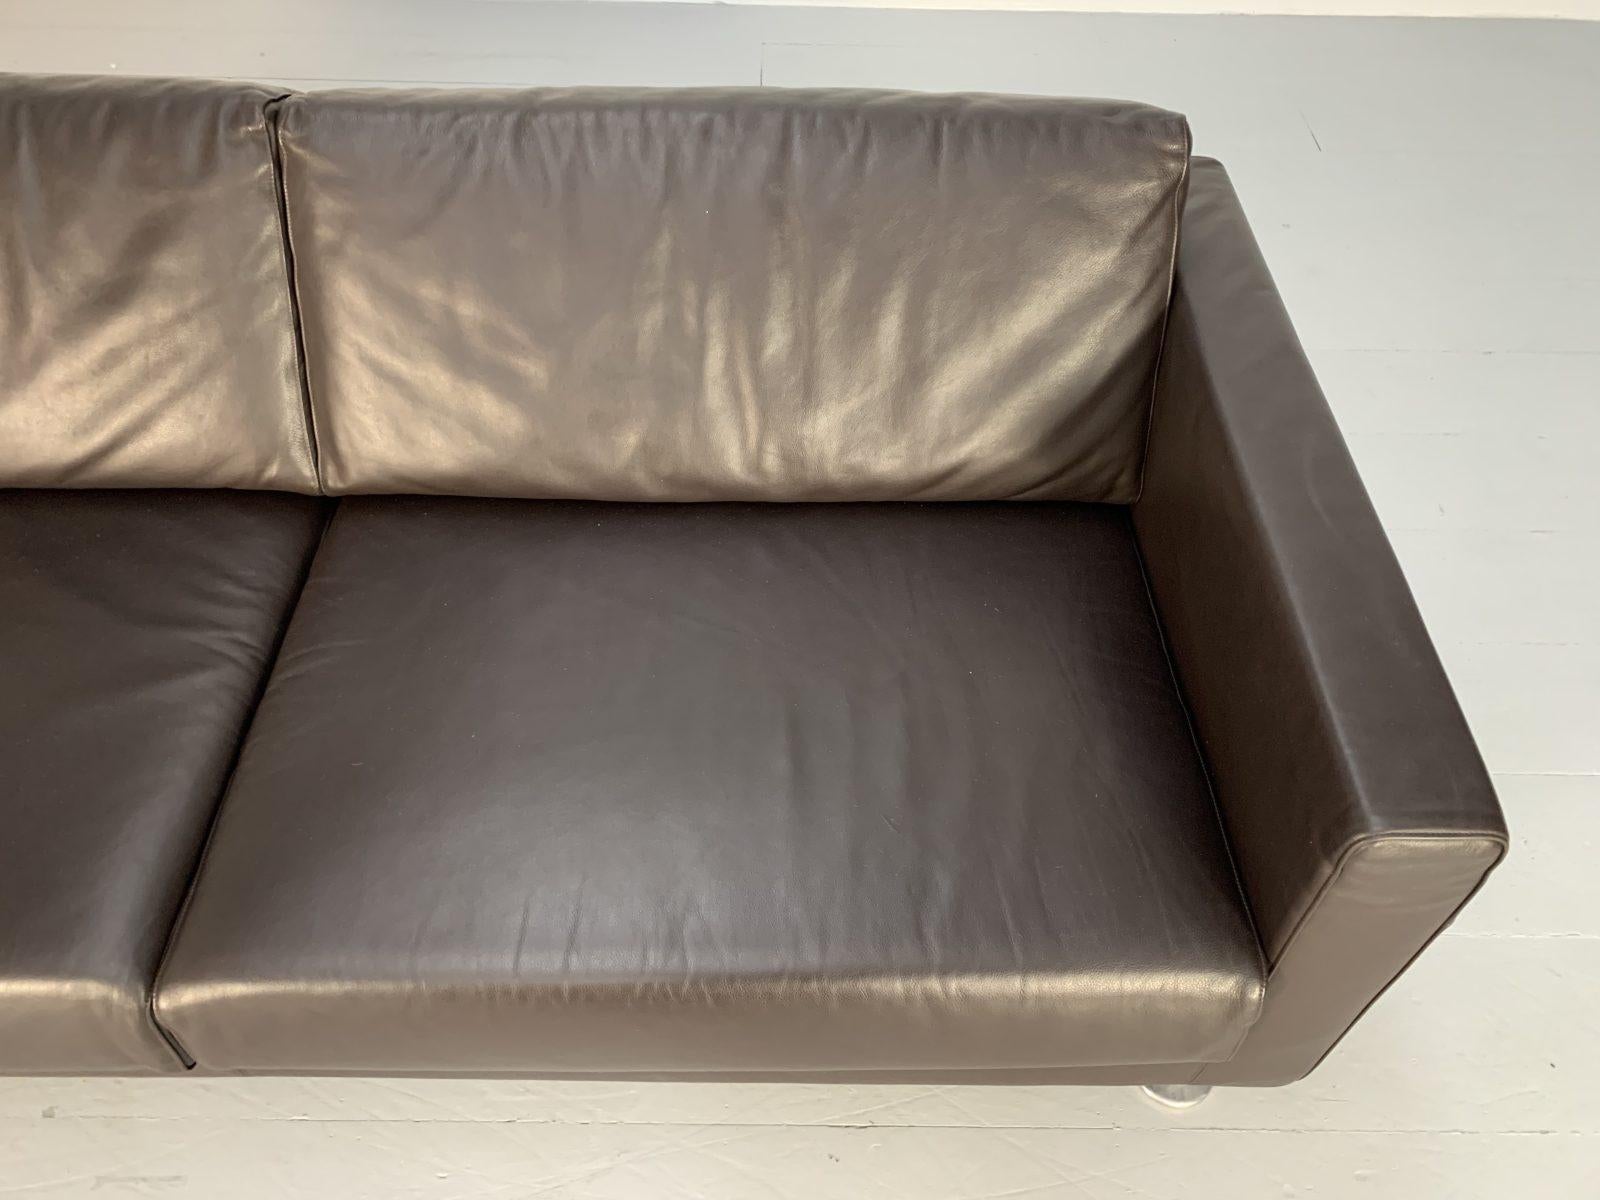 Vitra “Park” 2-Seat Sofa, in Dark Brown Leather For Sale 4